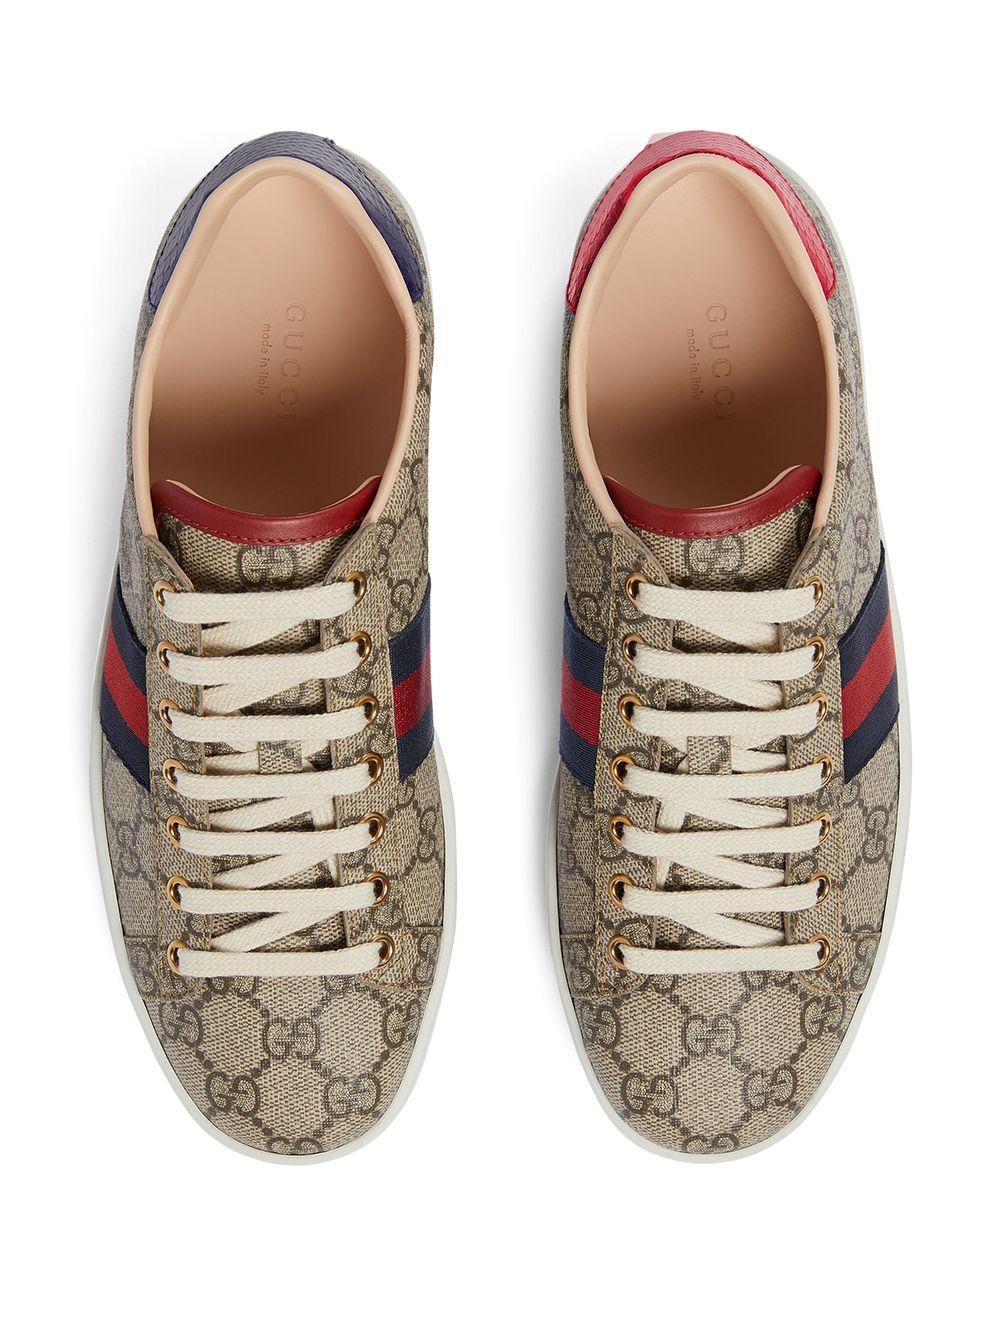 Gucci Gg Canvas New Ace Sneakes in Blue (Natural) - Save 45 